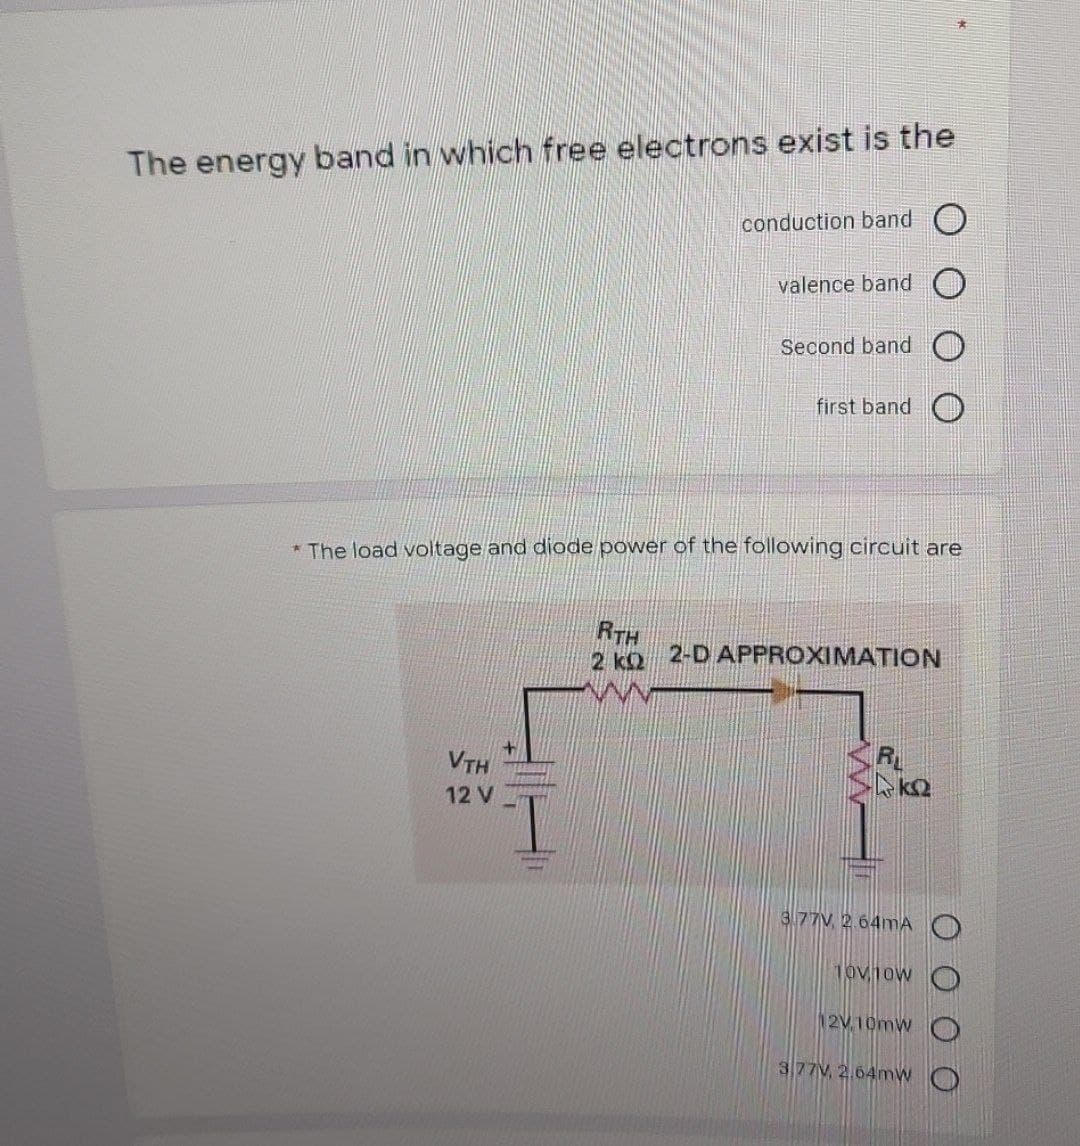 The energy band in which free electrons exist is the
conduction band O
valence band
Second band O
first band
* The load voltage and diode power of the following circuit are
RTH
2 kQ
2-D APPROXIMATION
VTH
R
12 V
I.
3.77V, 2.64mA O
10v1ow
12V 10mw
377V, 2.64mw
H工
